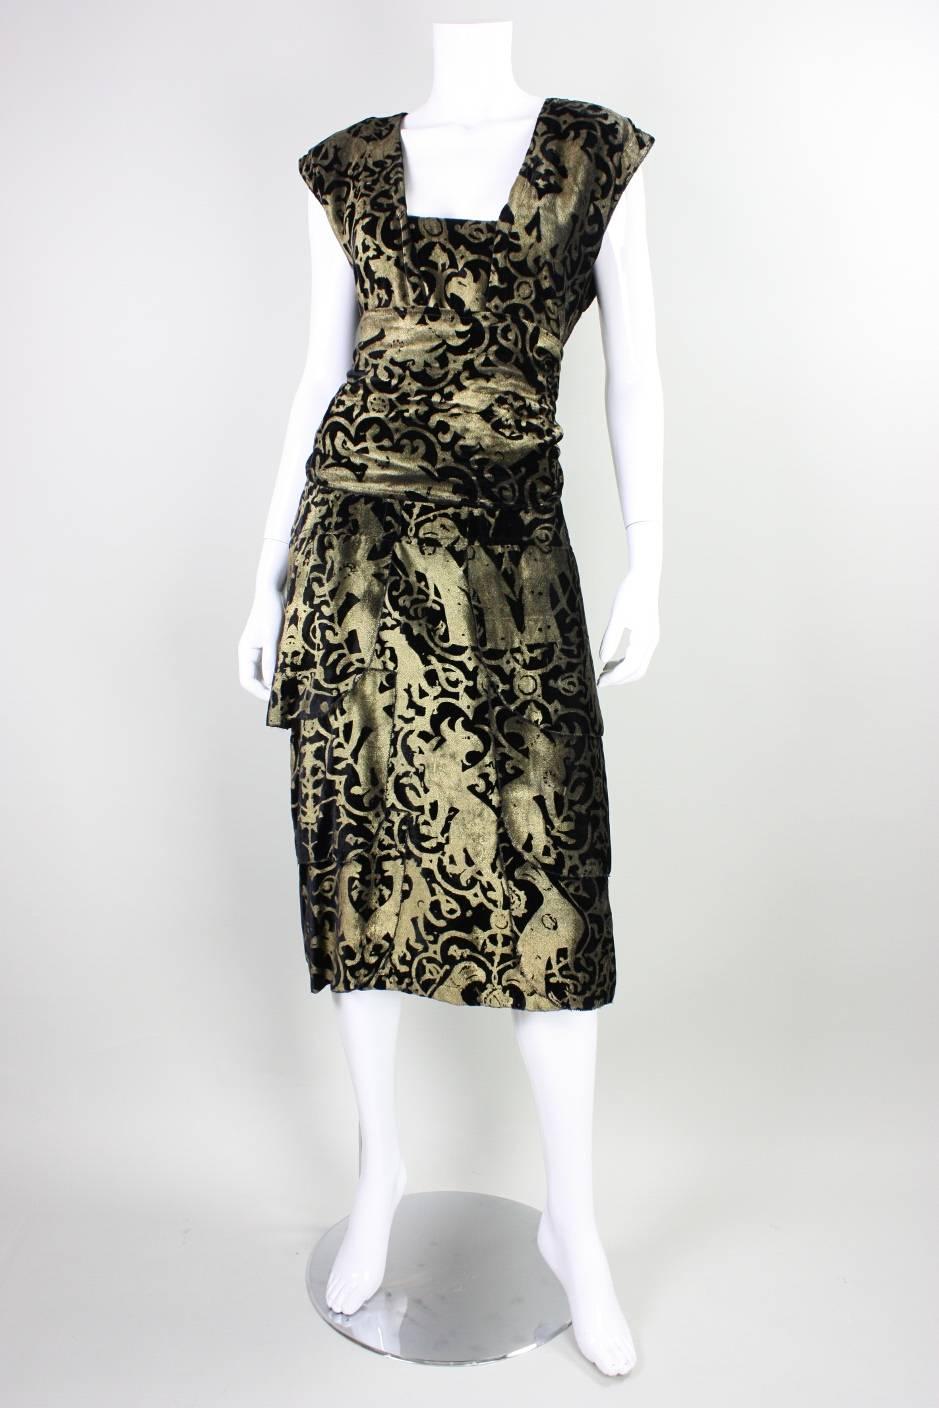 Vintage sheath dress from artist/clothing designer Fiorella Mancini and the Fiorella Gallery dates to the late 20th Century.  It is made of black velvet that features amorphous creatures that are stenciled allover in gold in the style of Gallenga. 